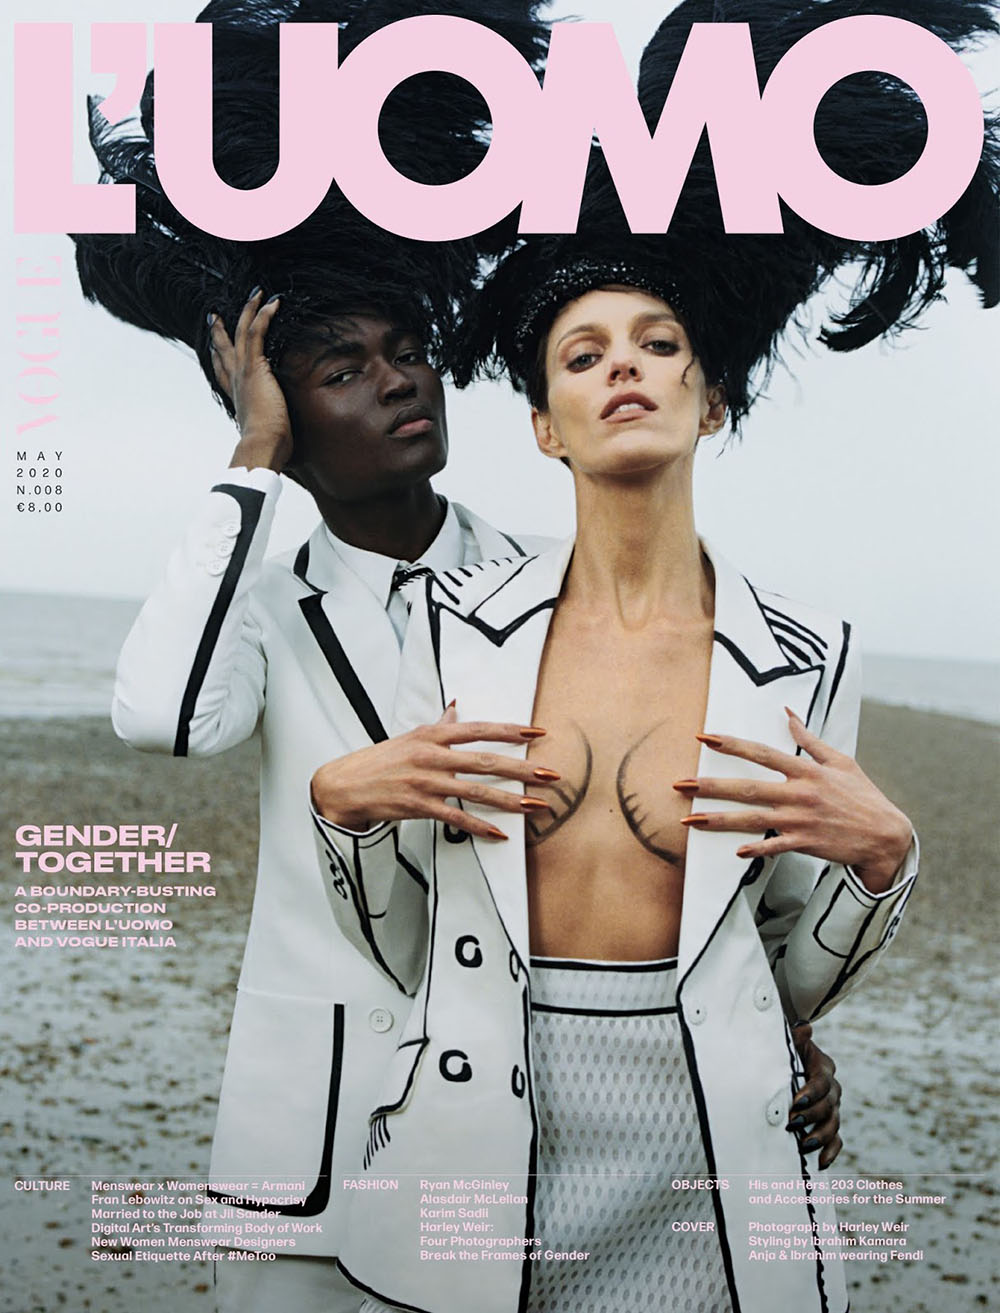 Anja Rubik covers Vogue Italia and L’Uomo Vogue May 2020 by Harley Weir